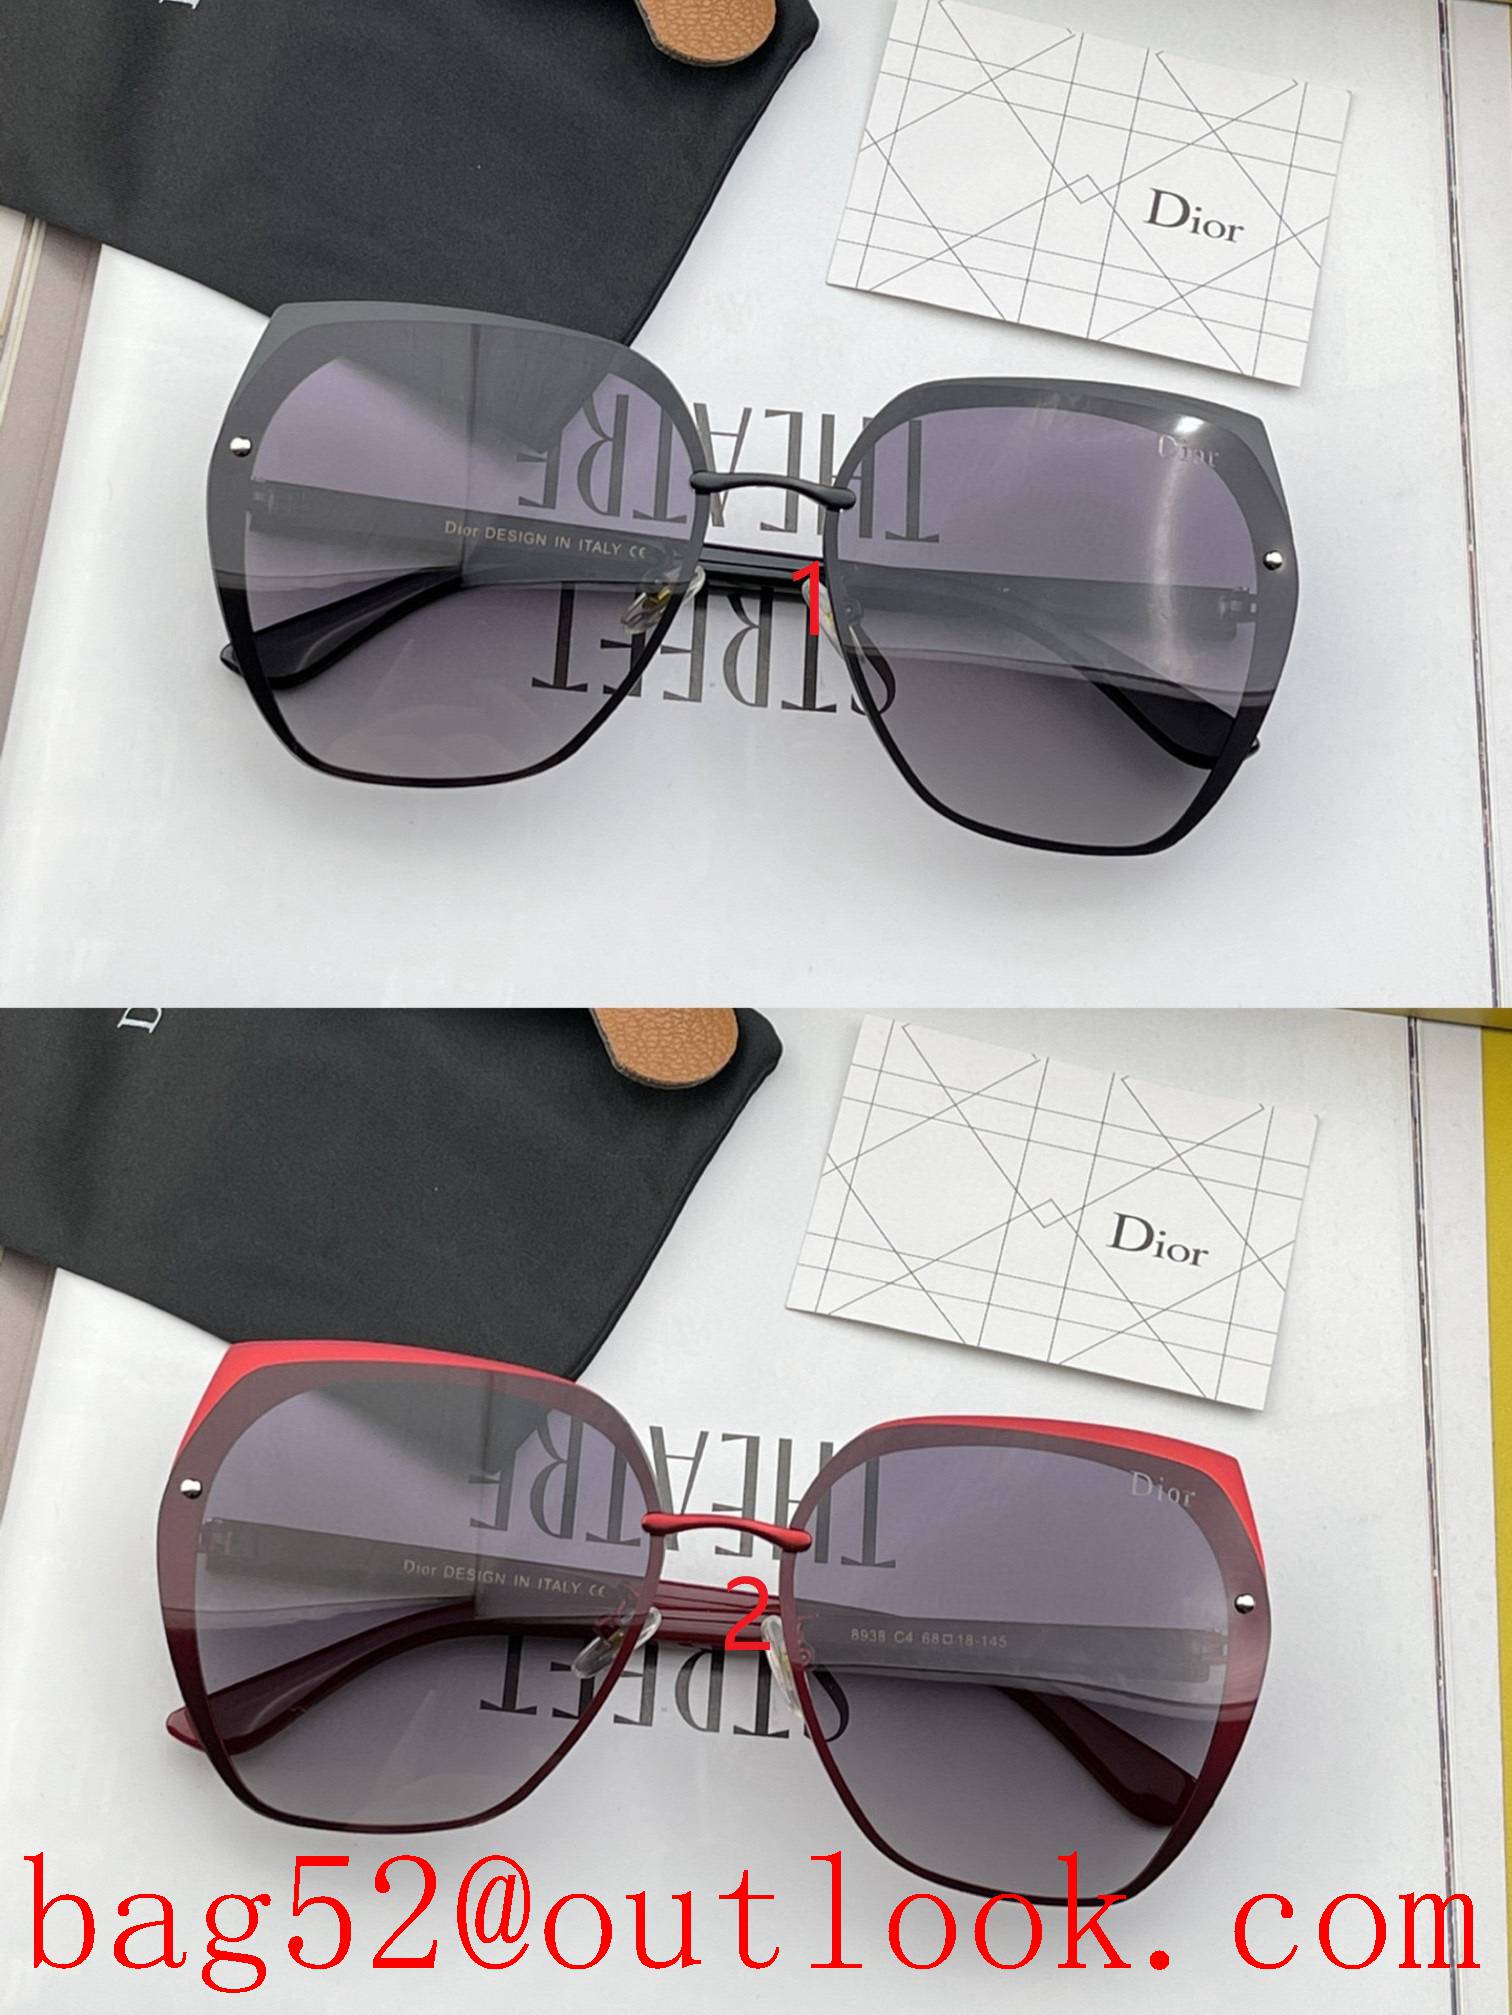 Dior Exclusive without filter sunglasses